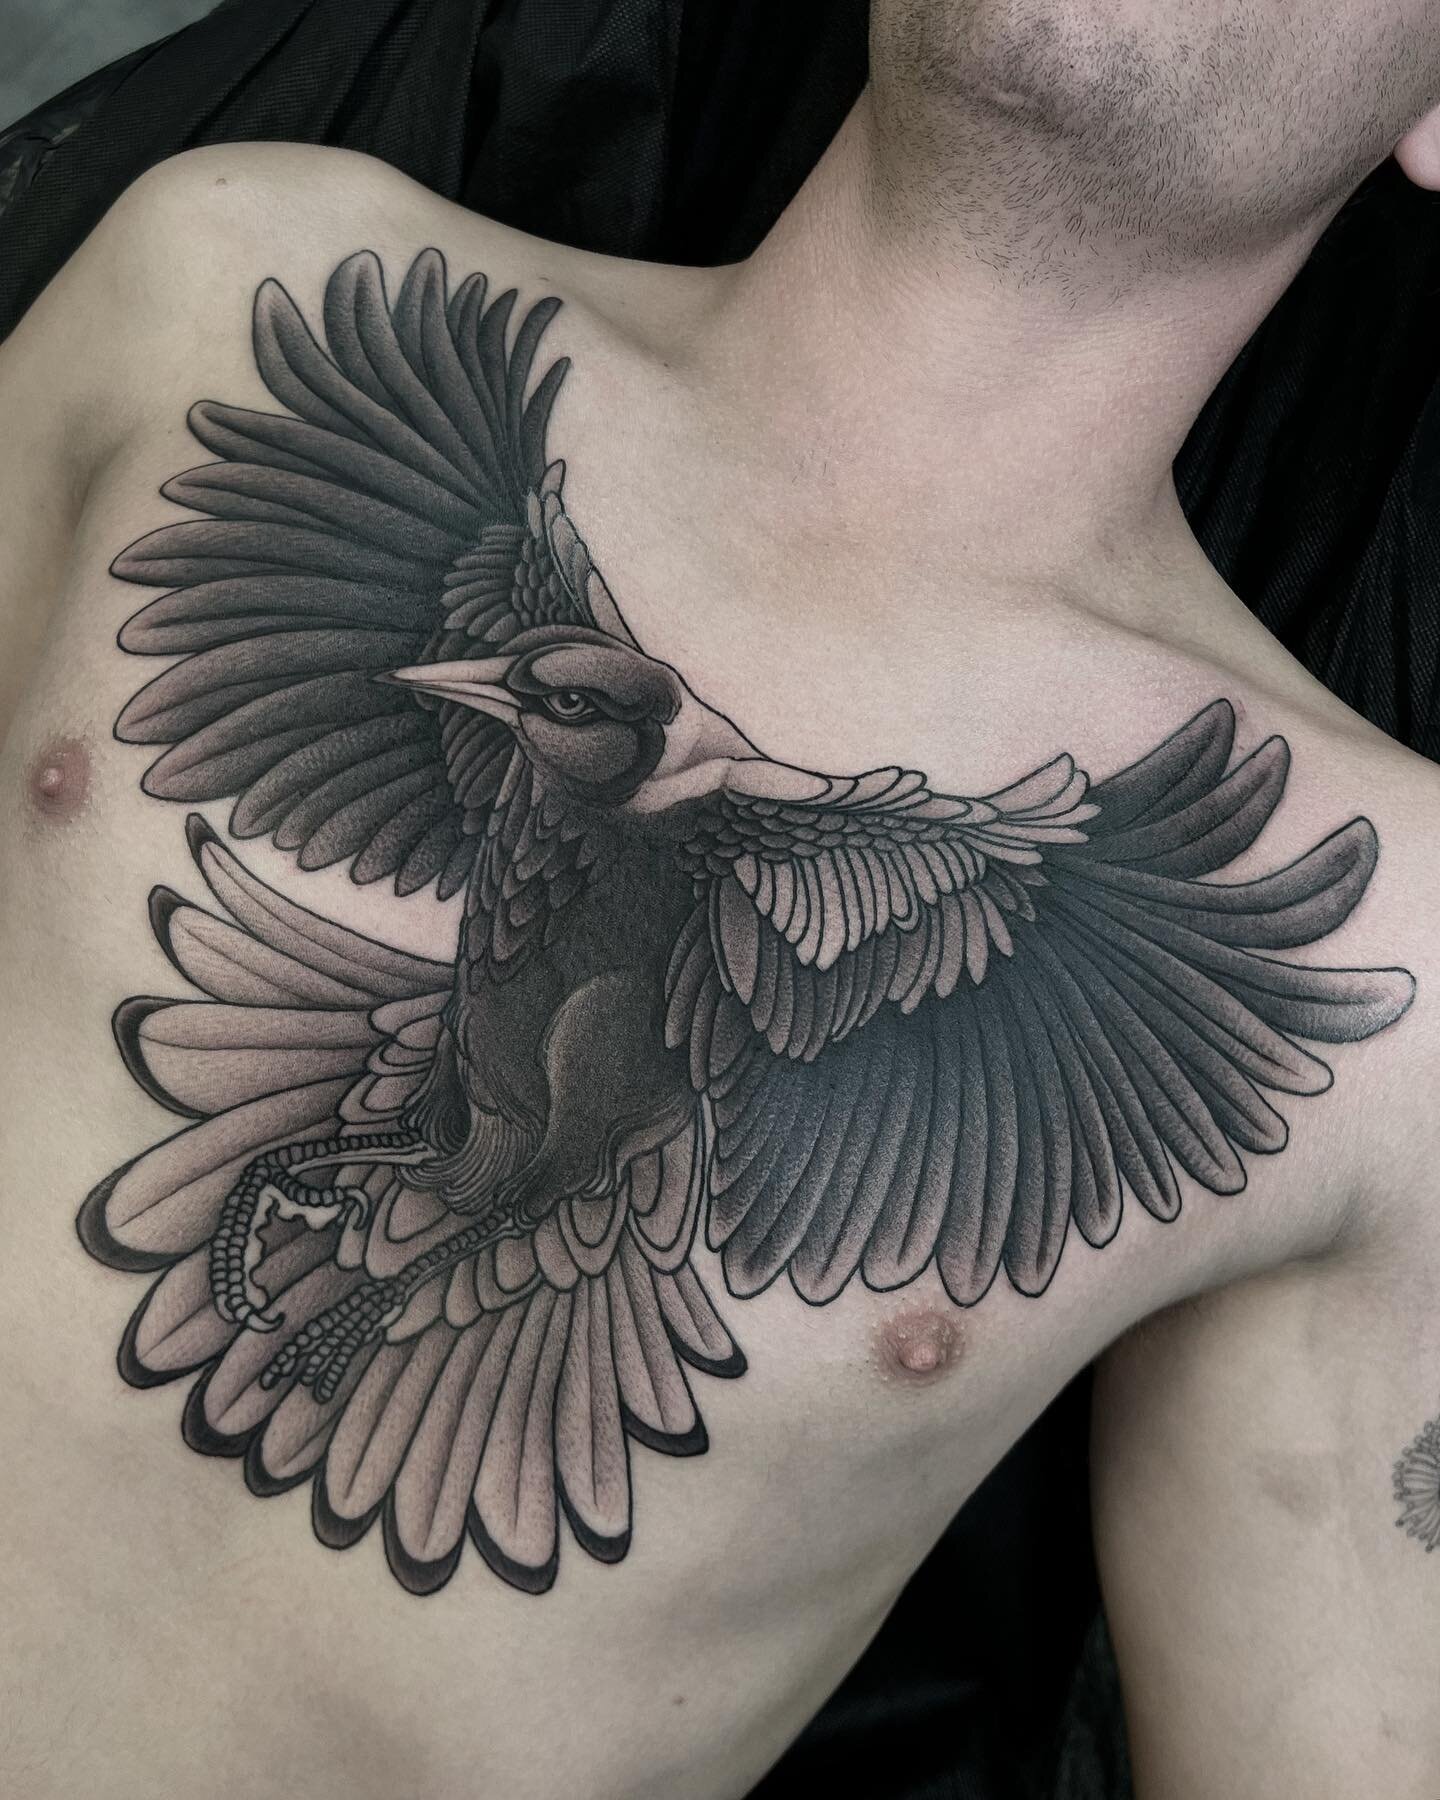 I have so many tattoos in my camera roll that I just forget to post
And sometimes I take really poor shots of tattoos that I wanted to post. Here's one of a Magpie I did a little while ago,
Two sessions and didn't move a muscle on either, I think rou